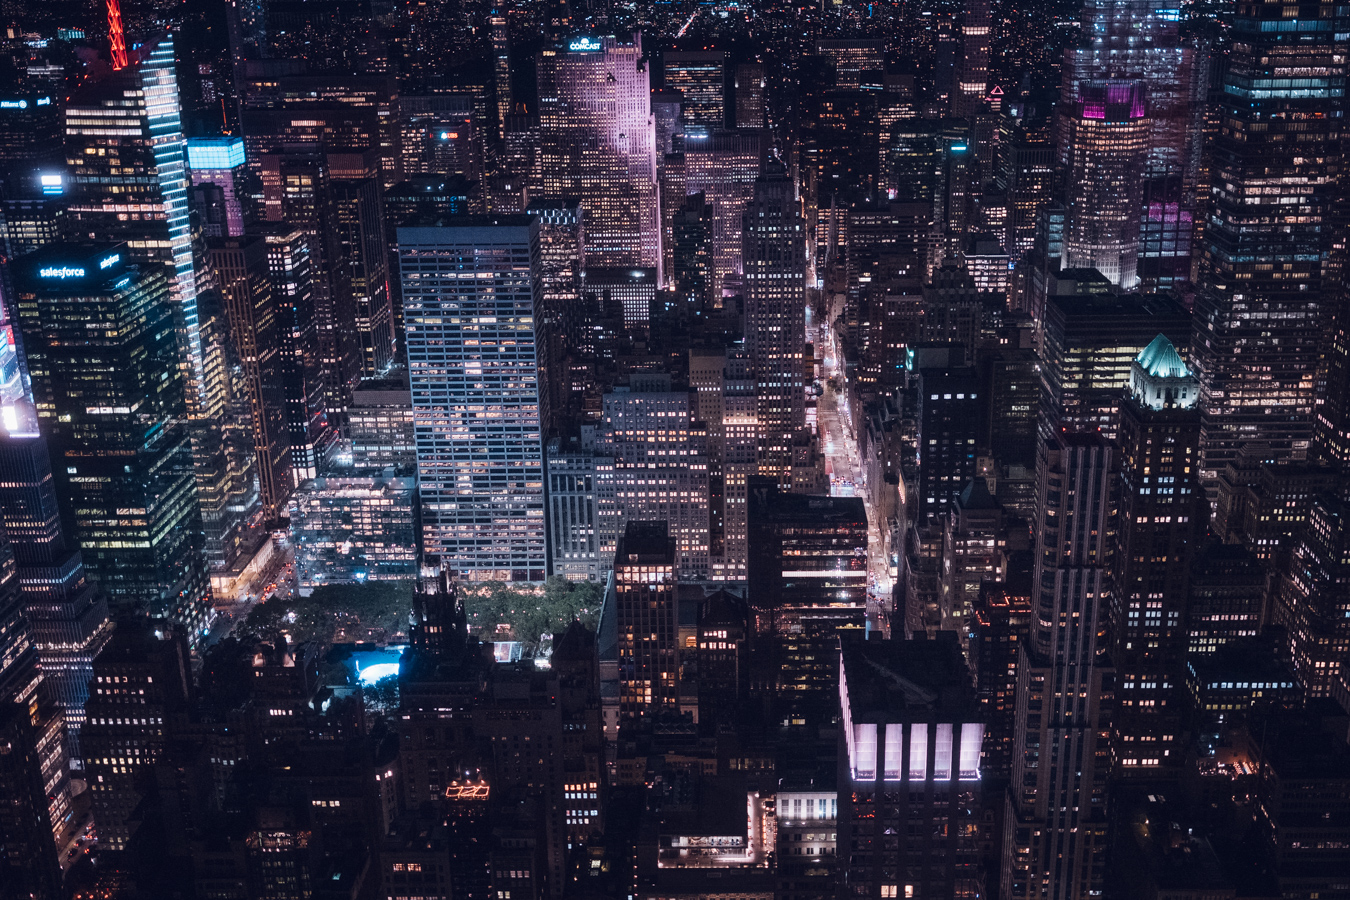 Photograph of Manhattan by night, taken from the Empire State Building, New York by Alex Nichol